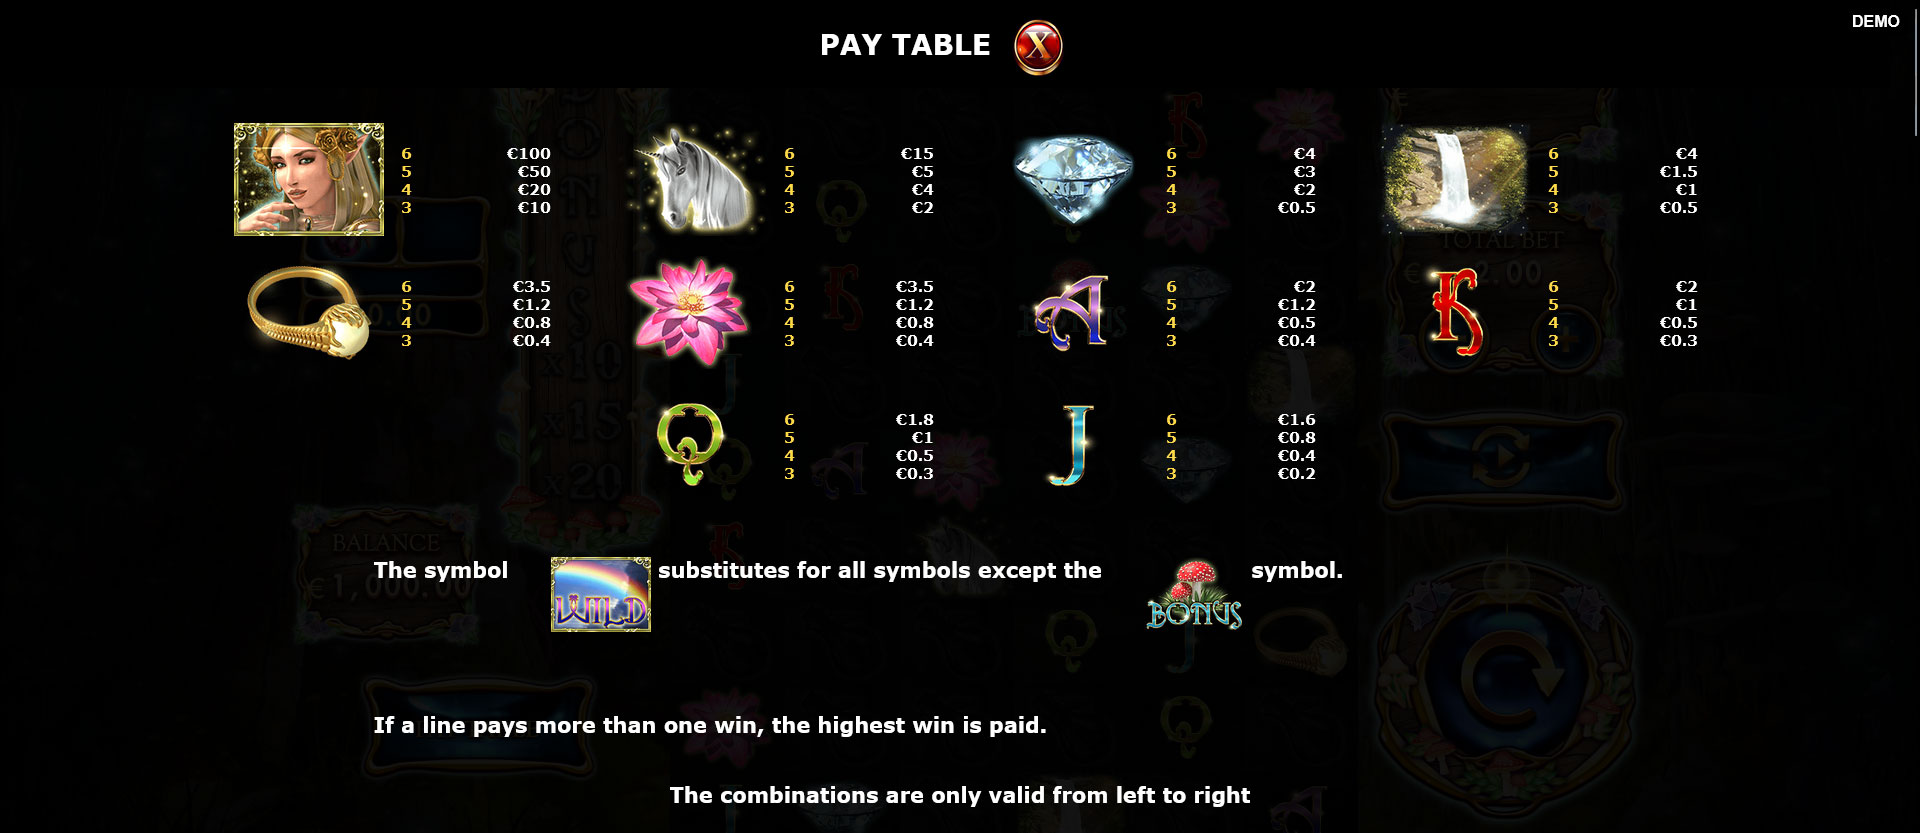 paytable della slot lady forest online